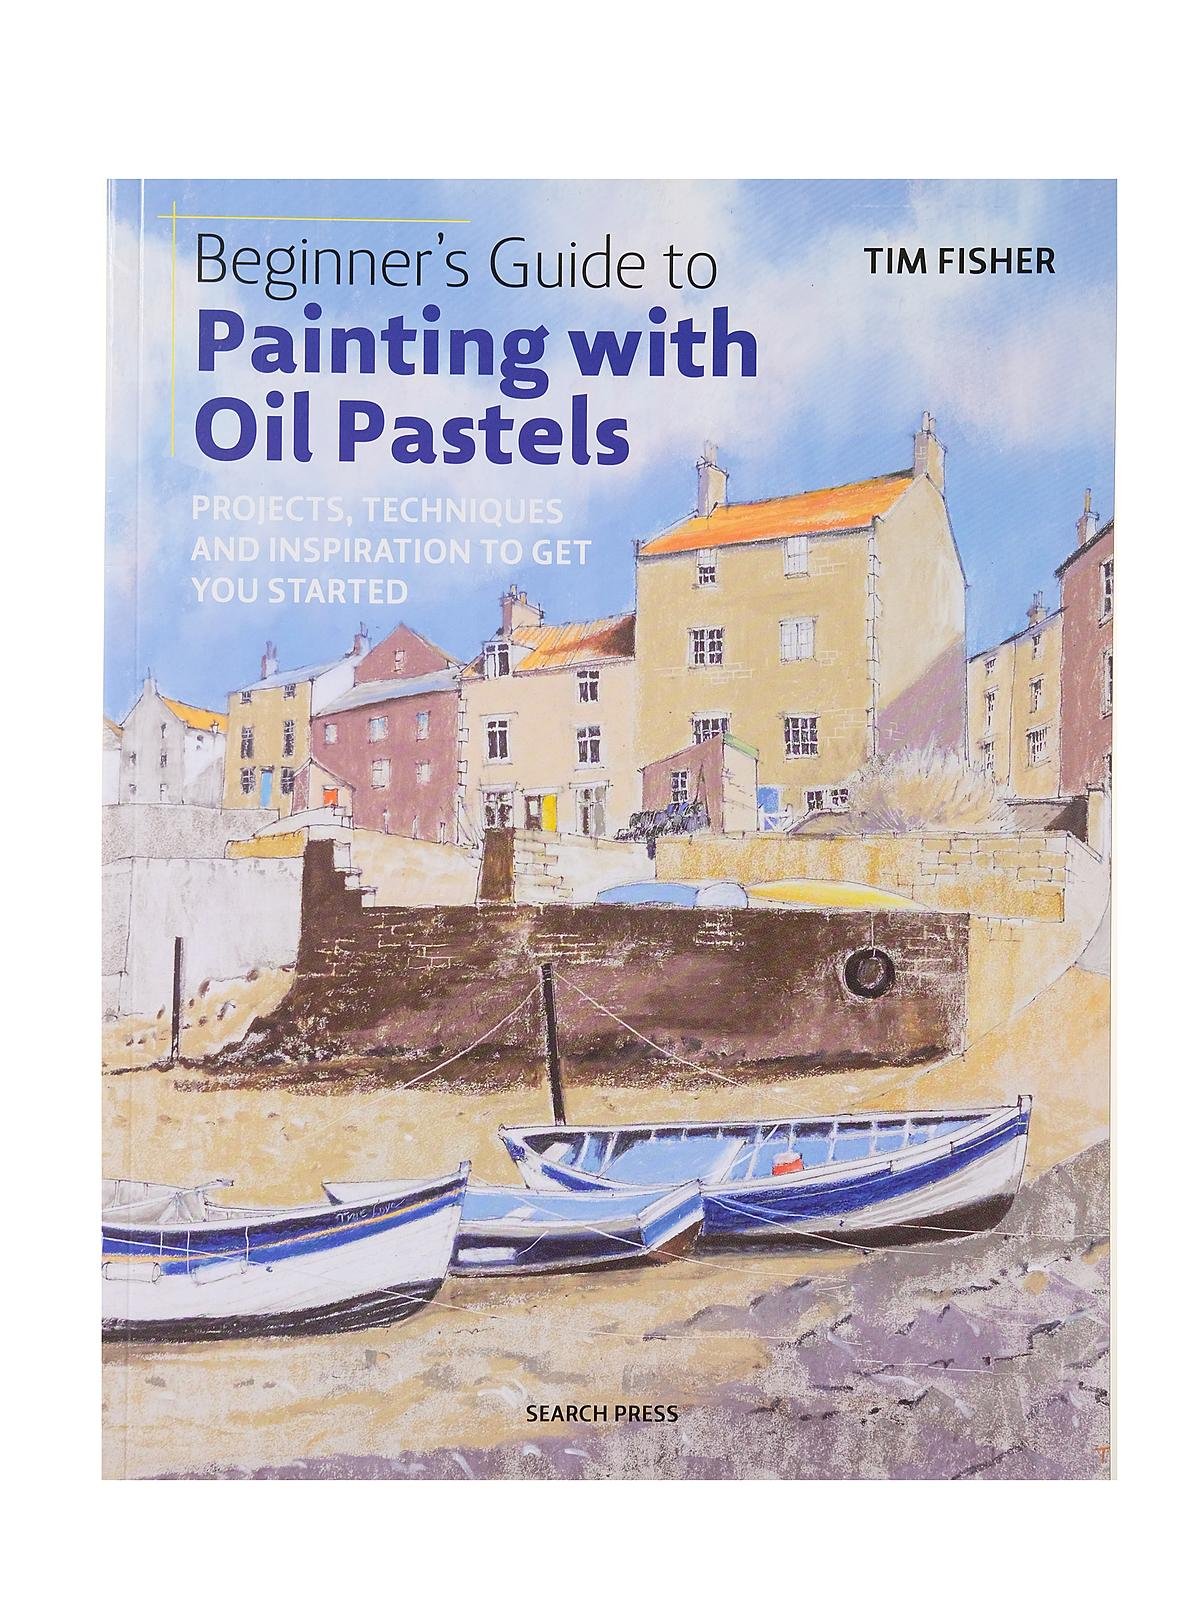 Search Press - Beginner's Guide to Painting with Oil Pastels